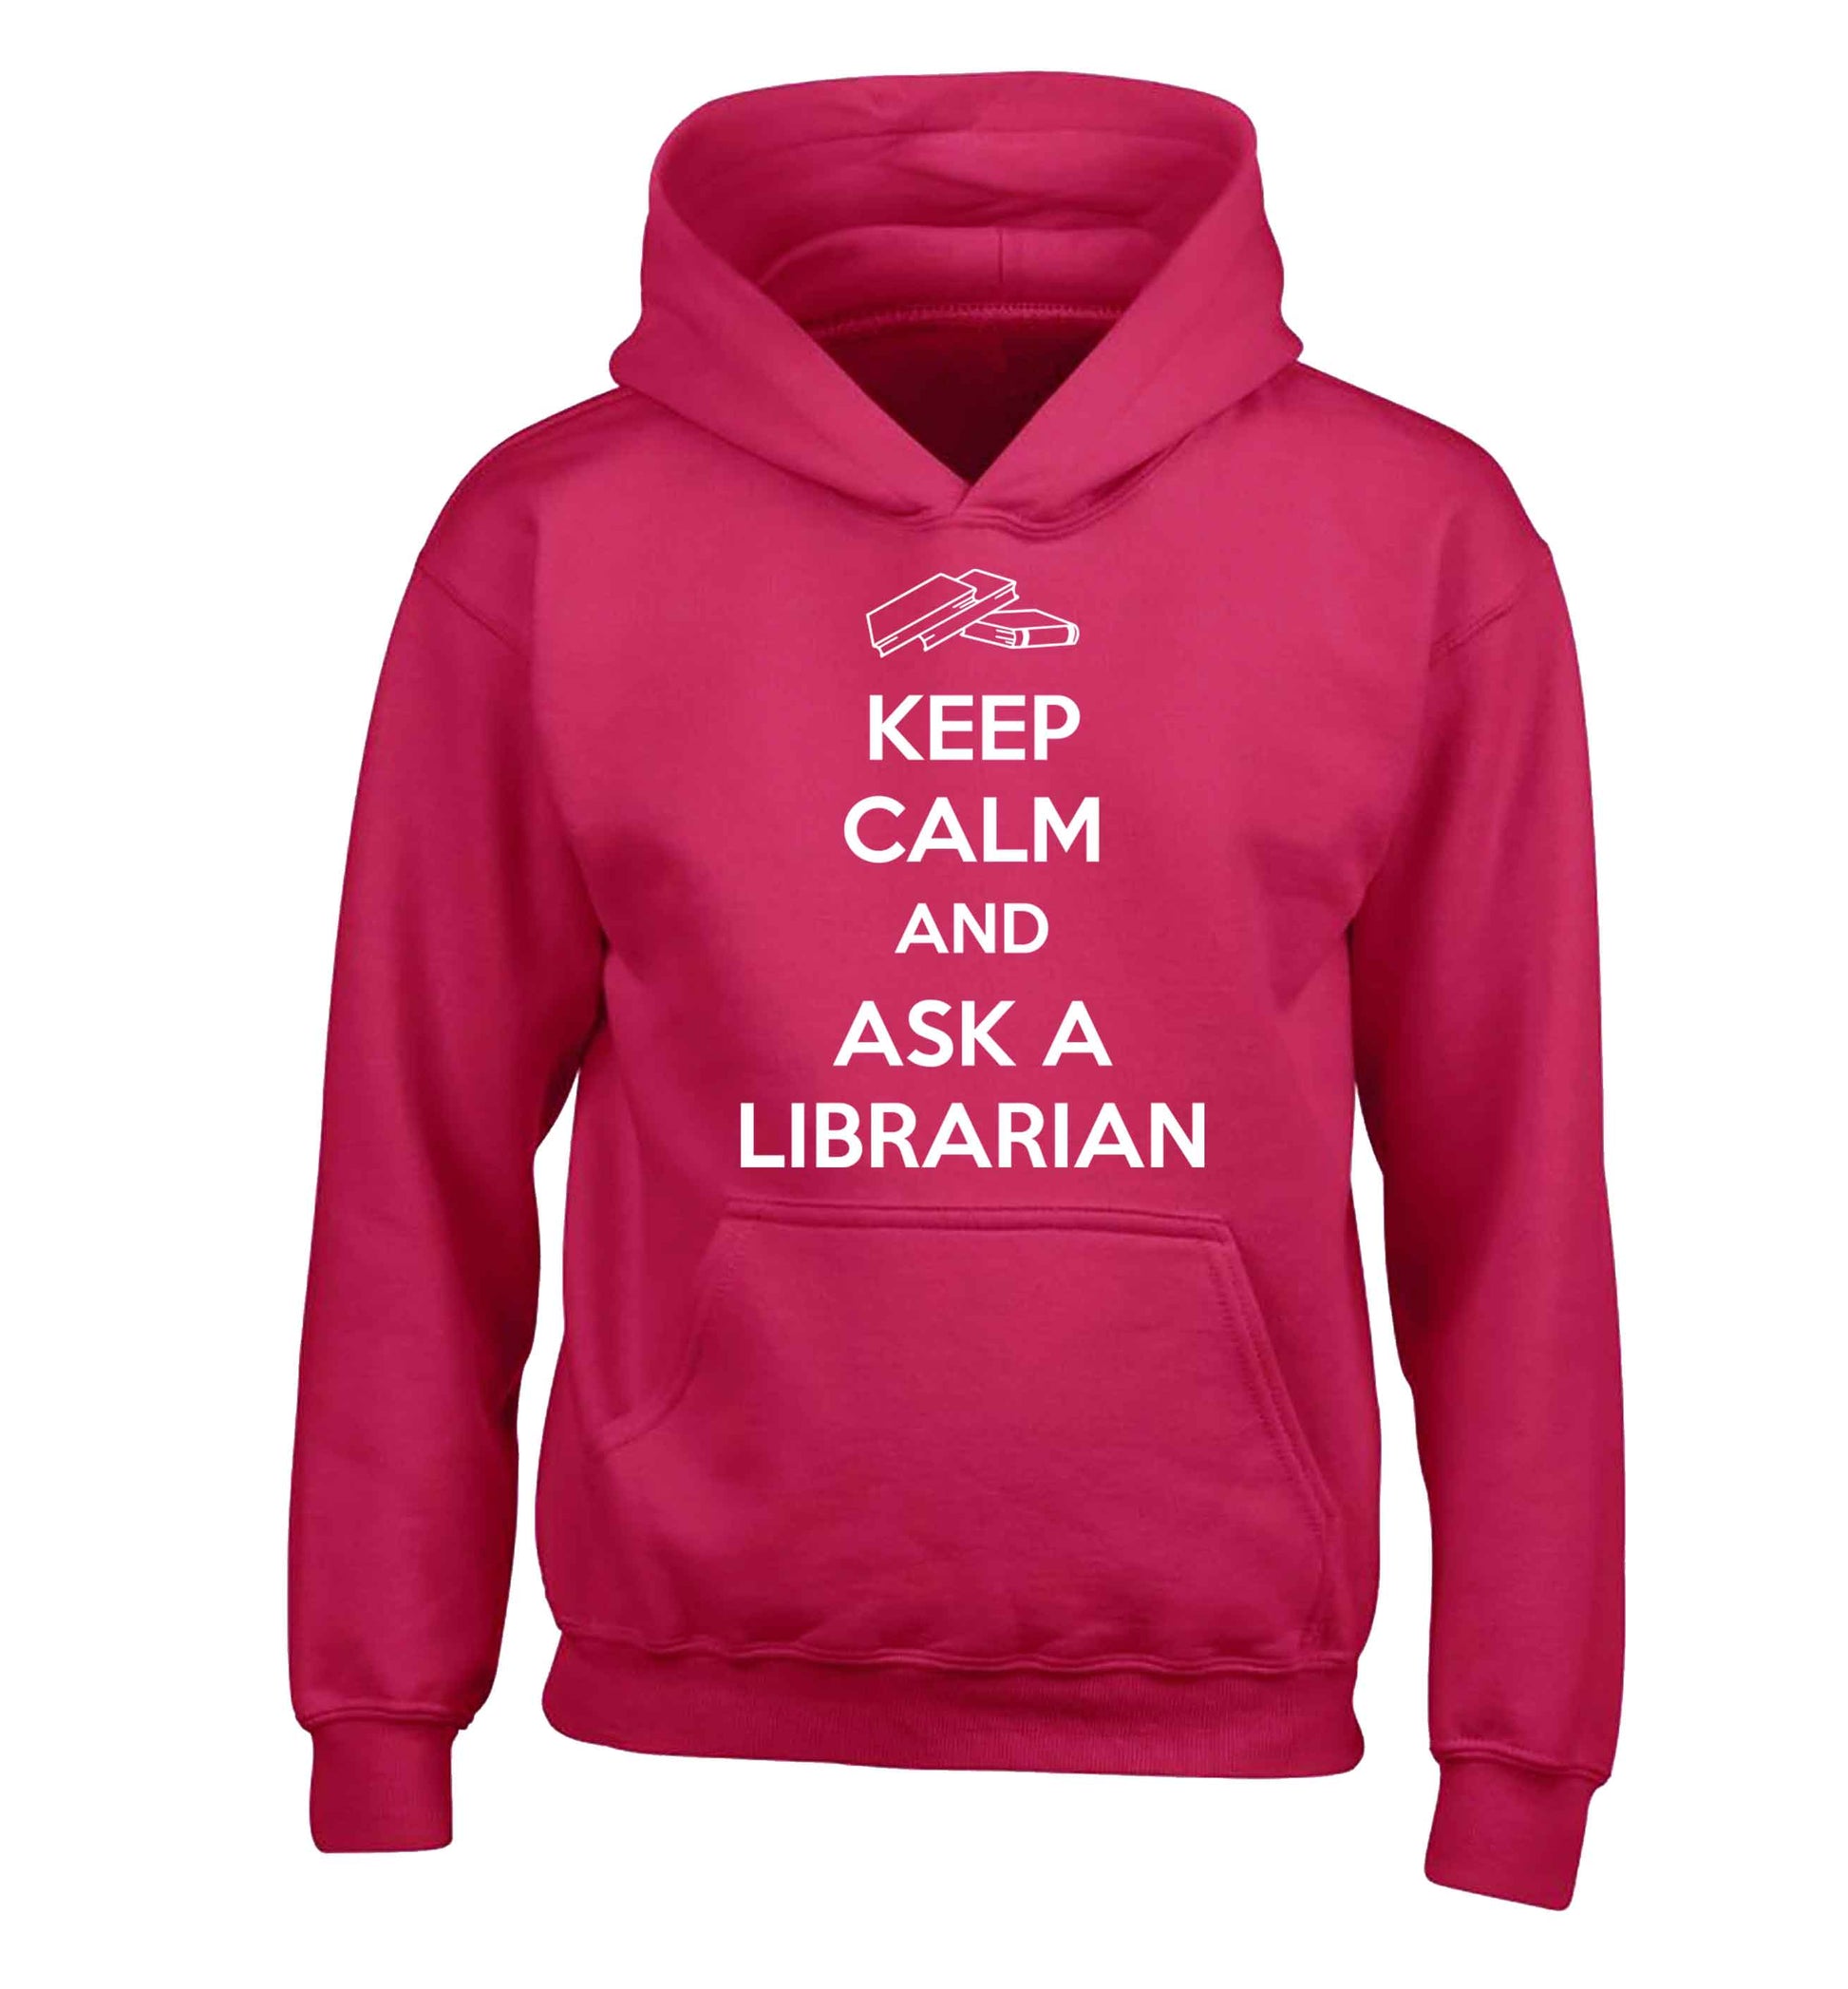 Keep calm and ask a librarian children's pink hoodie 12-13 Years